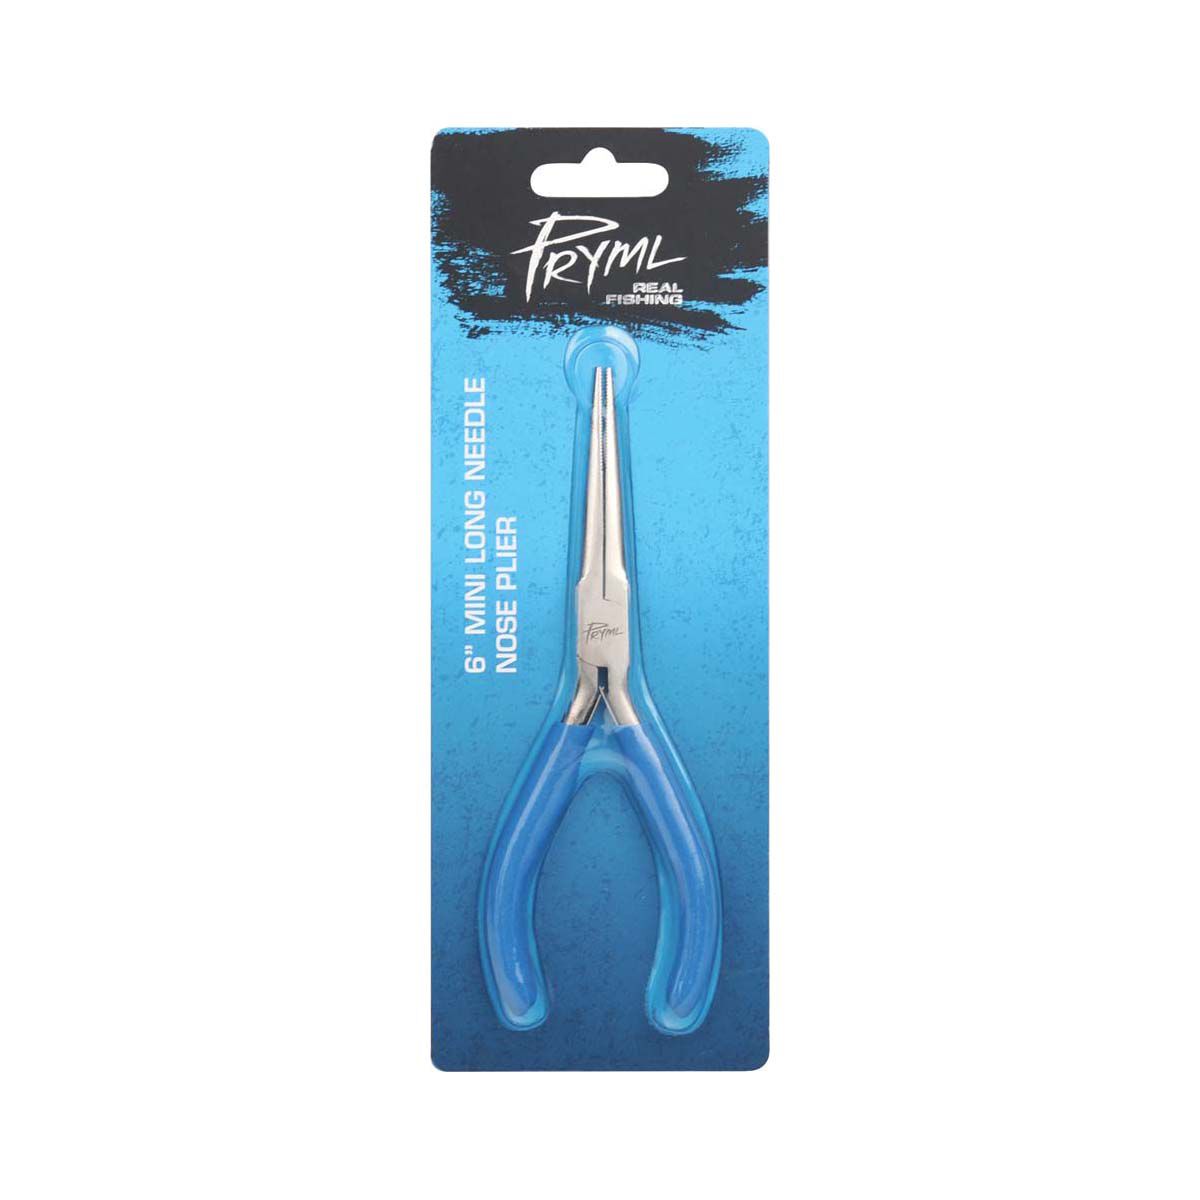 Pryml Mini Long Needle Nose Pliers 6in